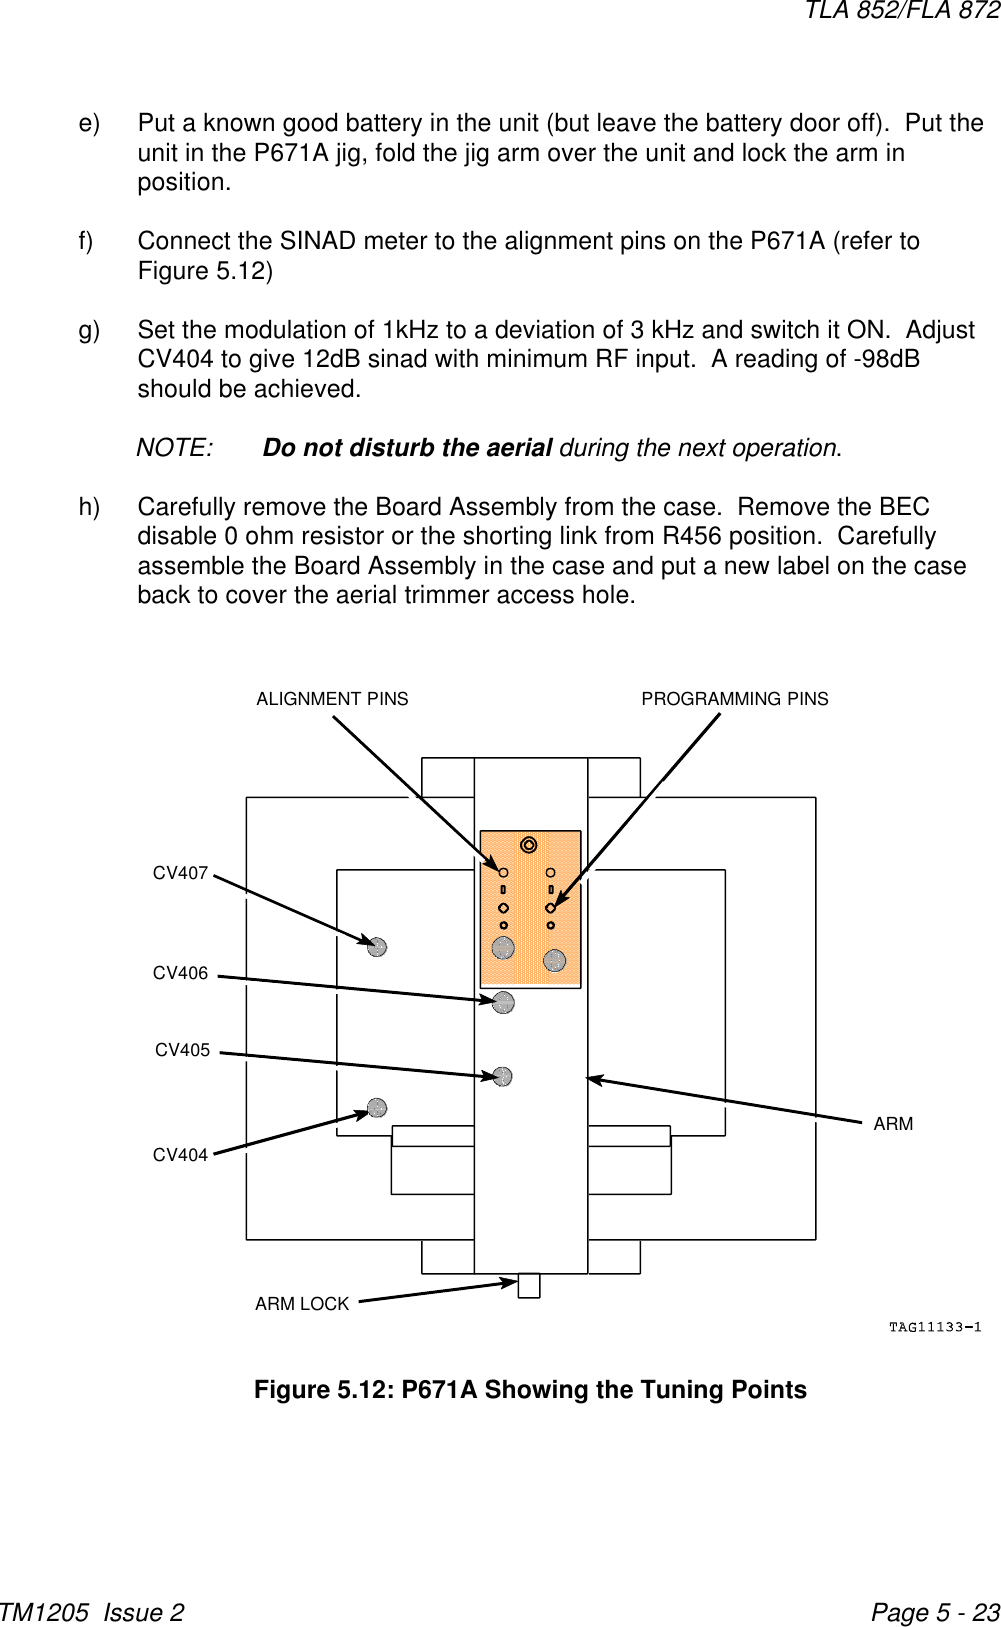 ARMARM LOCKCV404CV406CV407ALIGNMENT PINS PROGRAMMING PINSCV405TLA 852/FLA 872TM1205  Issue 2 Page 5 - 23Figure 5.12: P671A Showing the Tuning Pointse) Put a known good battery in the unit (but leave the battery door off).  Put theunit in the P671A jig, fold the jig arm over the unit and lock the arm inposition.  f) Connect the SINAD meter to the alignment pins on the P671A (refer toFigure 5.12)g) Set the modulation of 1kHz to a deviation of 3 kHz and switch it ON.  AdjustCV404 to give 12dB sinad with minimum RF input.  A reading of -98dBshould be achieved.NOTE: Do not disturb the aerial during the next operation.h) Carefully remove the Board Assembly from the case.  Remove the BECdisable 0 ohm resistor or the shorting link from R456 position.  Carefullyassemble the Board Assembly in the case and put a new label on the caseback to cover the aerial trimmer access hole.